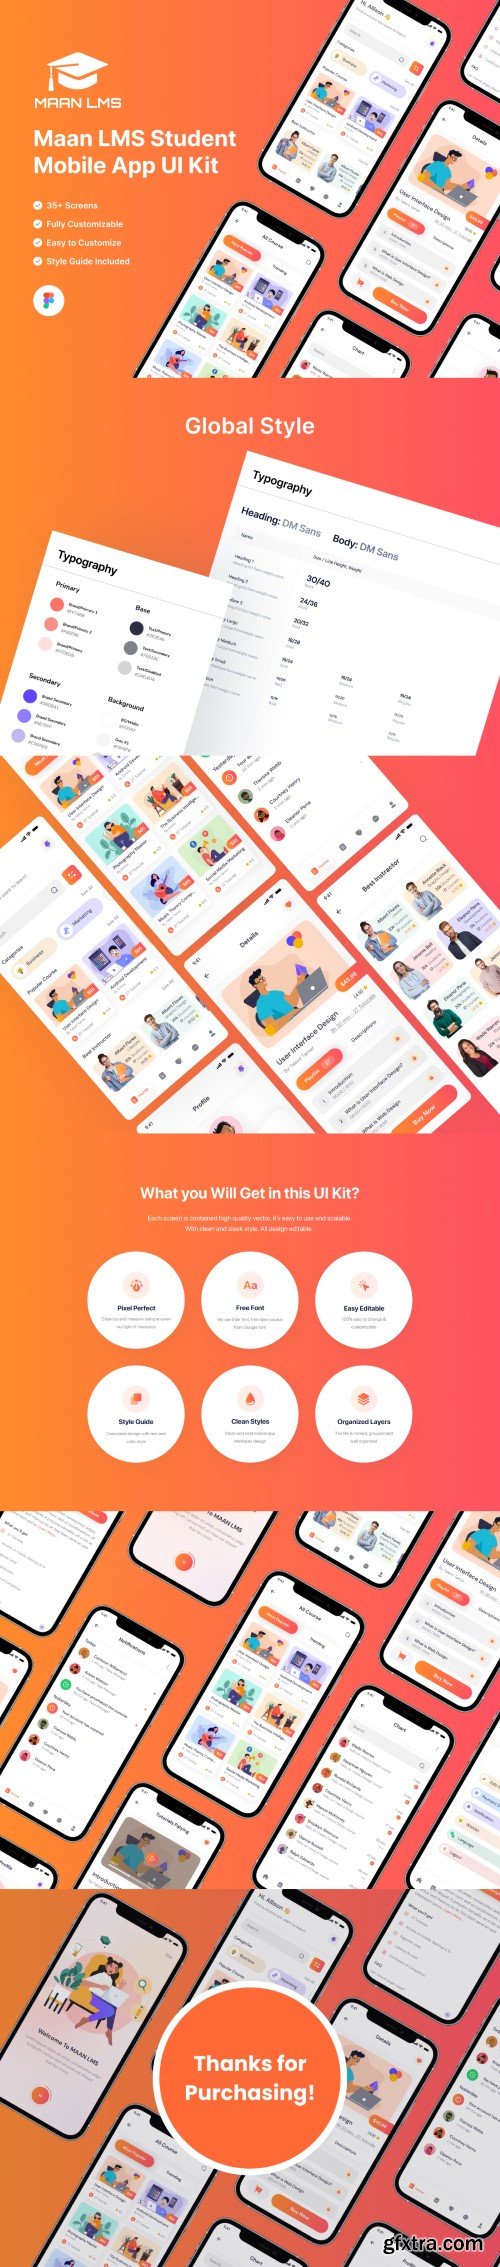 UI8 - Maan LMS- Student Mobile App Flutter iOS & Android UI Kit